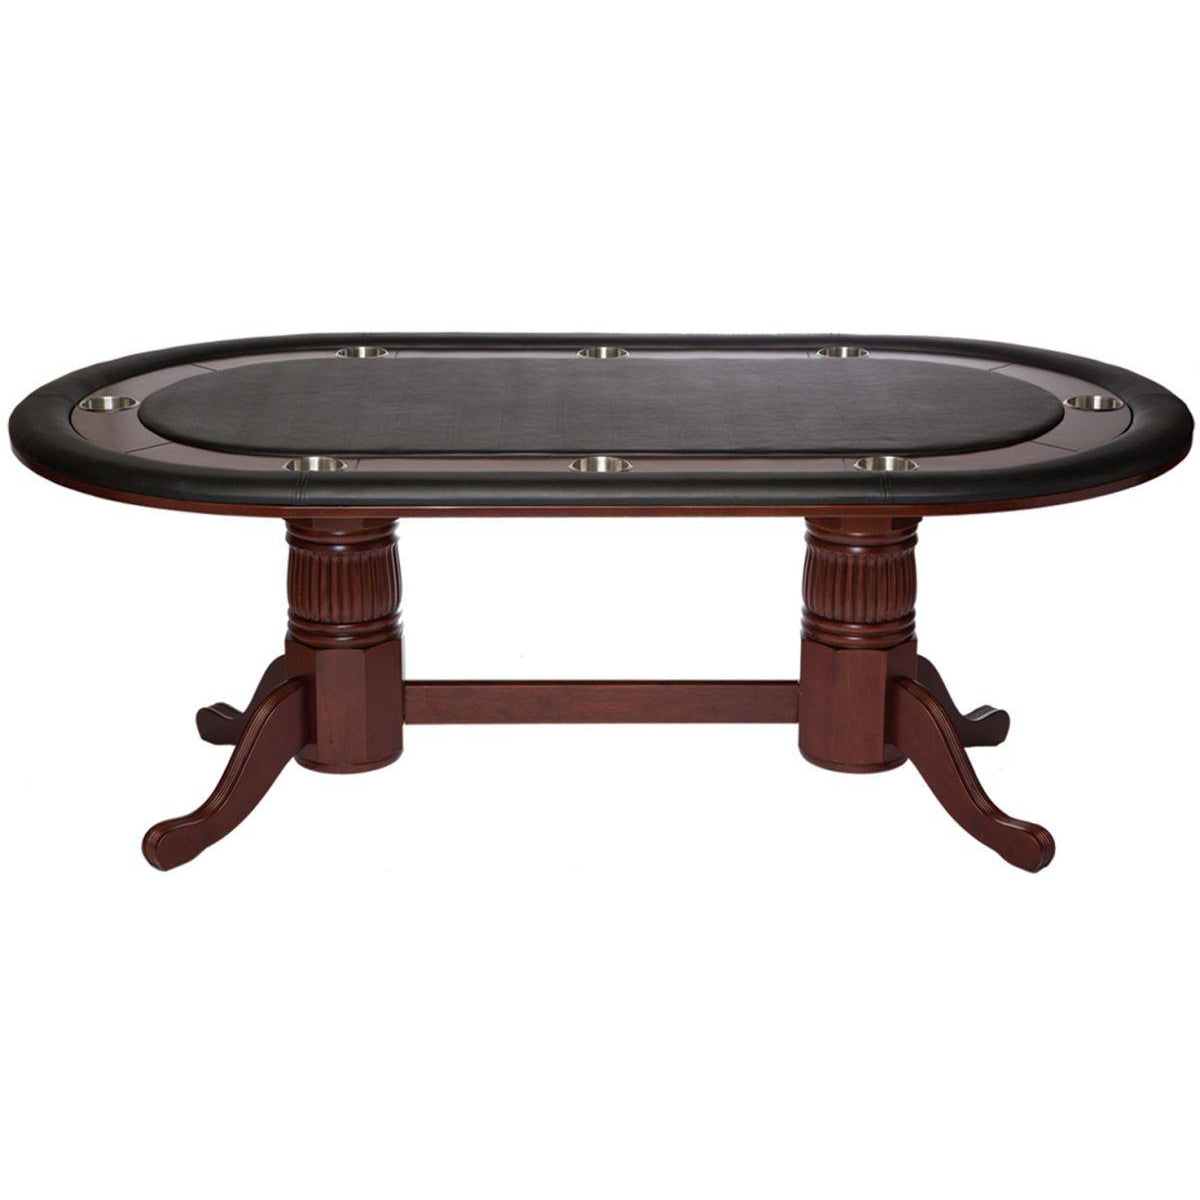 RAM Game Room Oval Poker Table Set with Matching Chairs-AMERICANA-POKER-TABLES